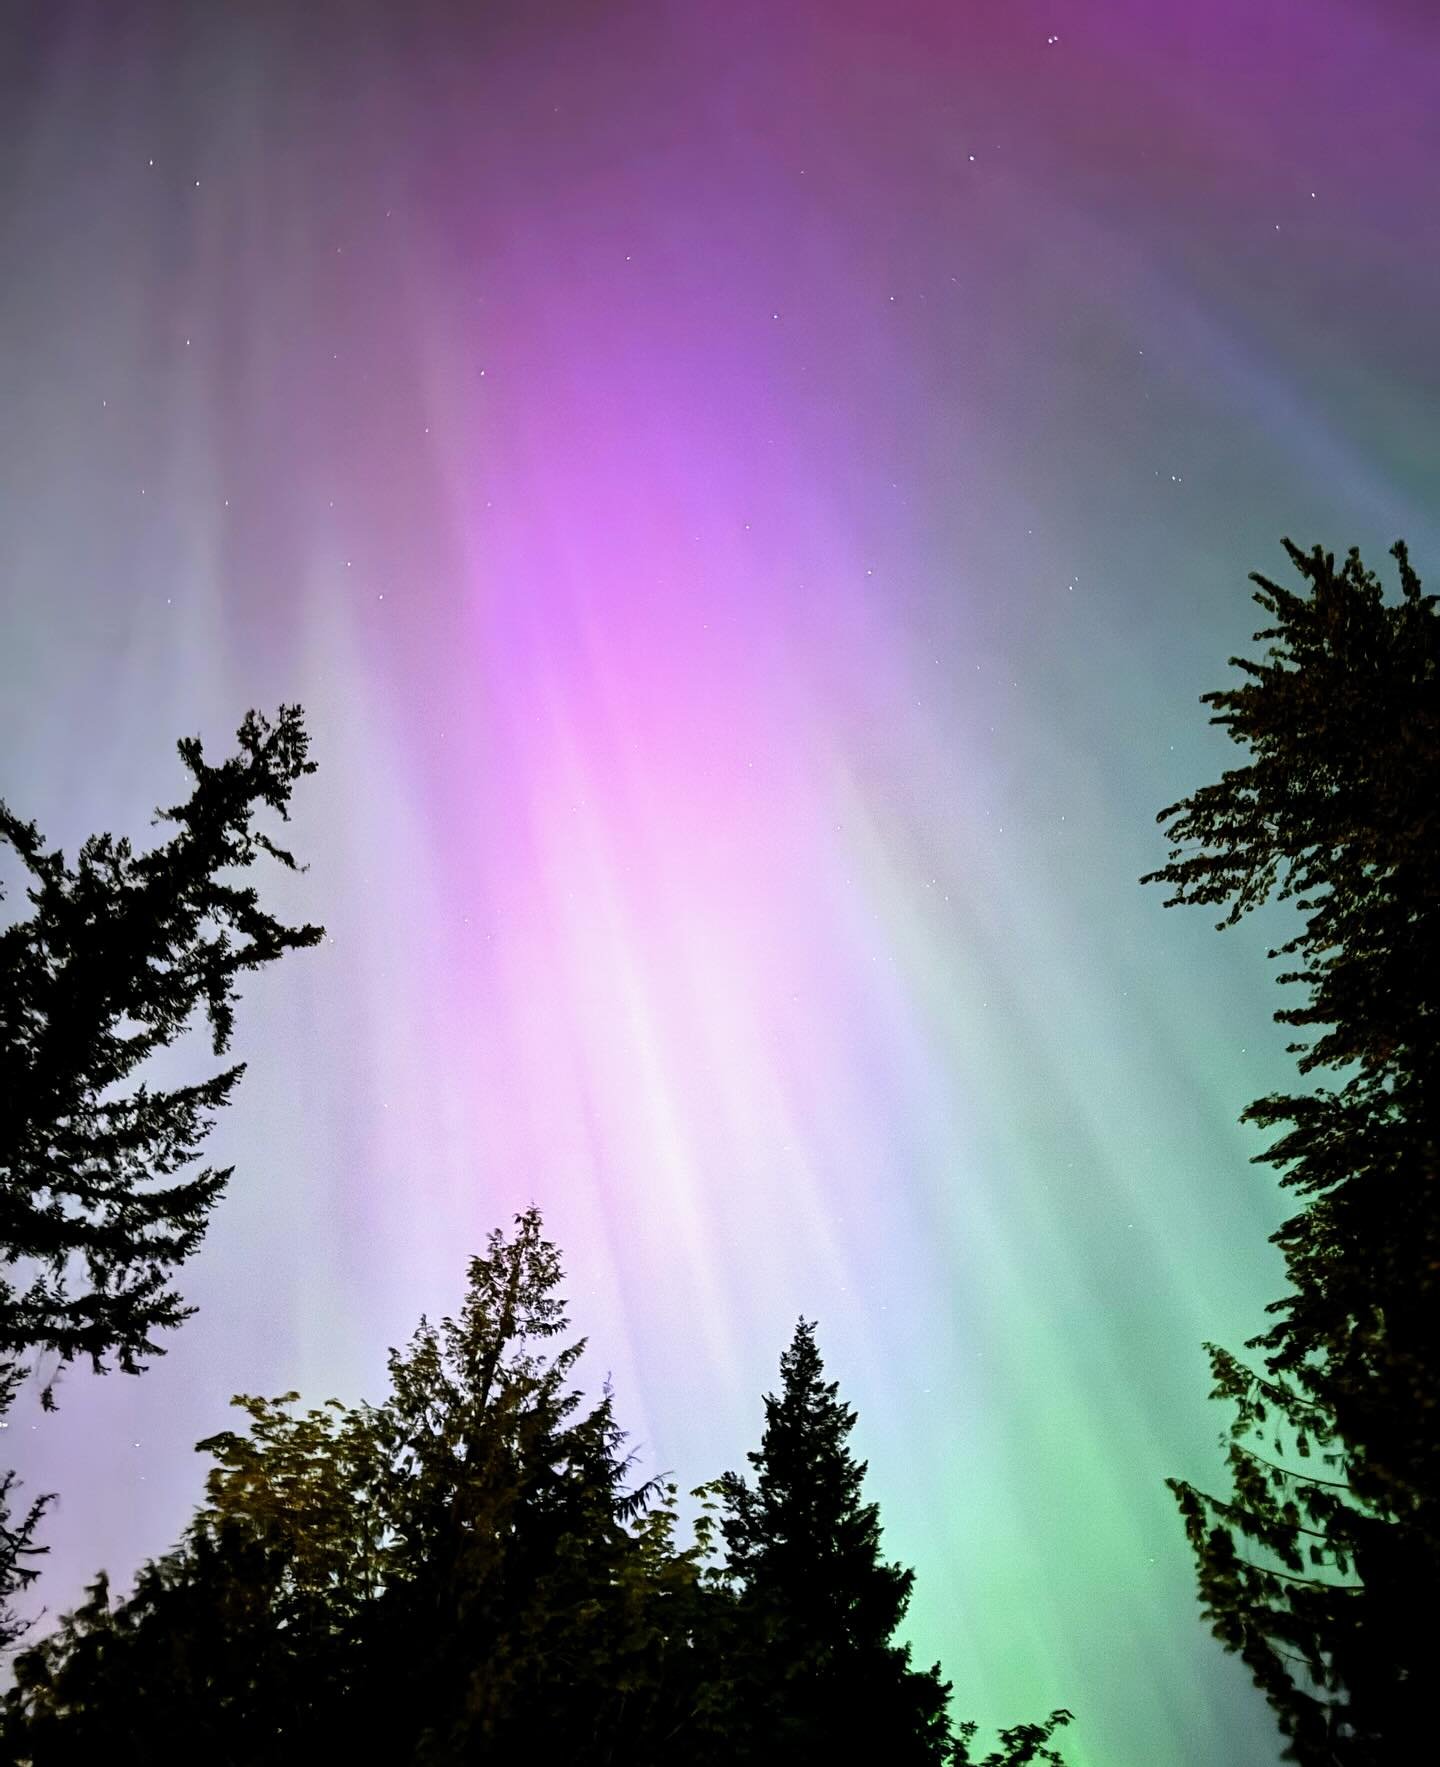 The Northern Lights were a beautiful surprise that appeared out of nowhere, swirling and dancing across the sky. A juxtaposition of delicate, flamboyant, and peaceful. And the best part- we just went out our front door to see!! 🎆